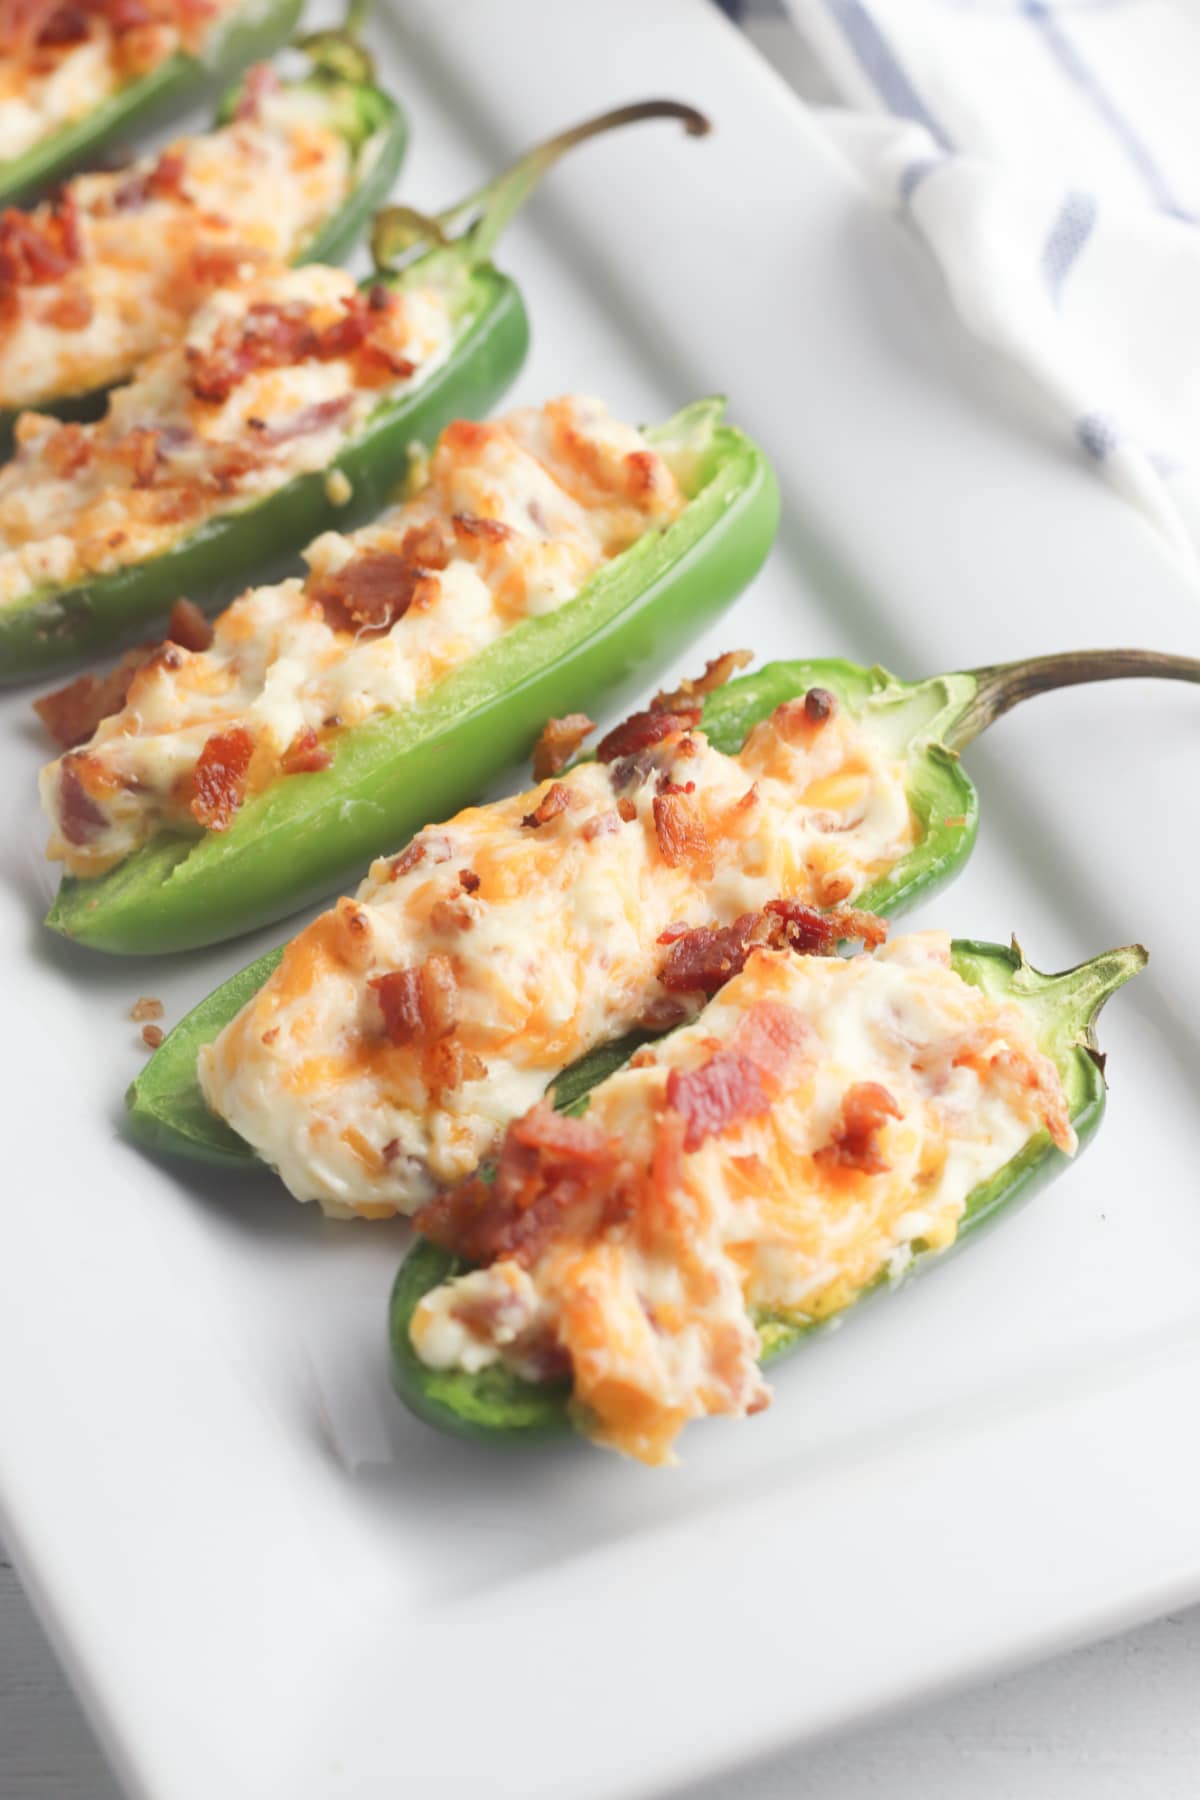 Jalapeno poppers up close